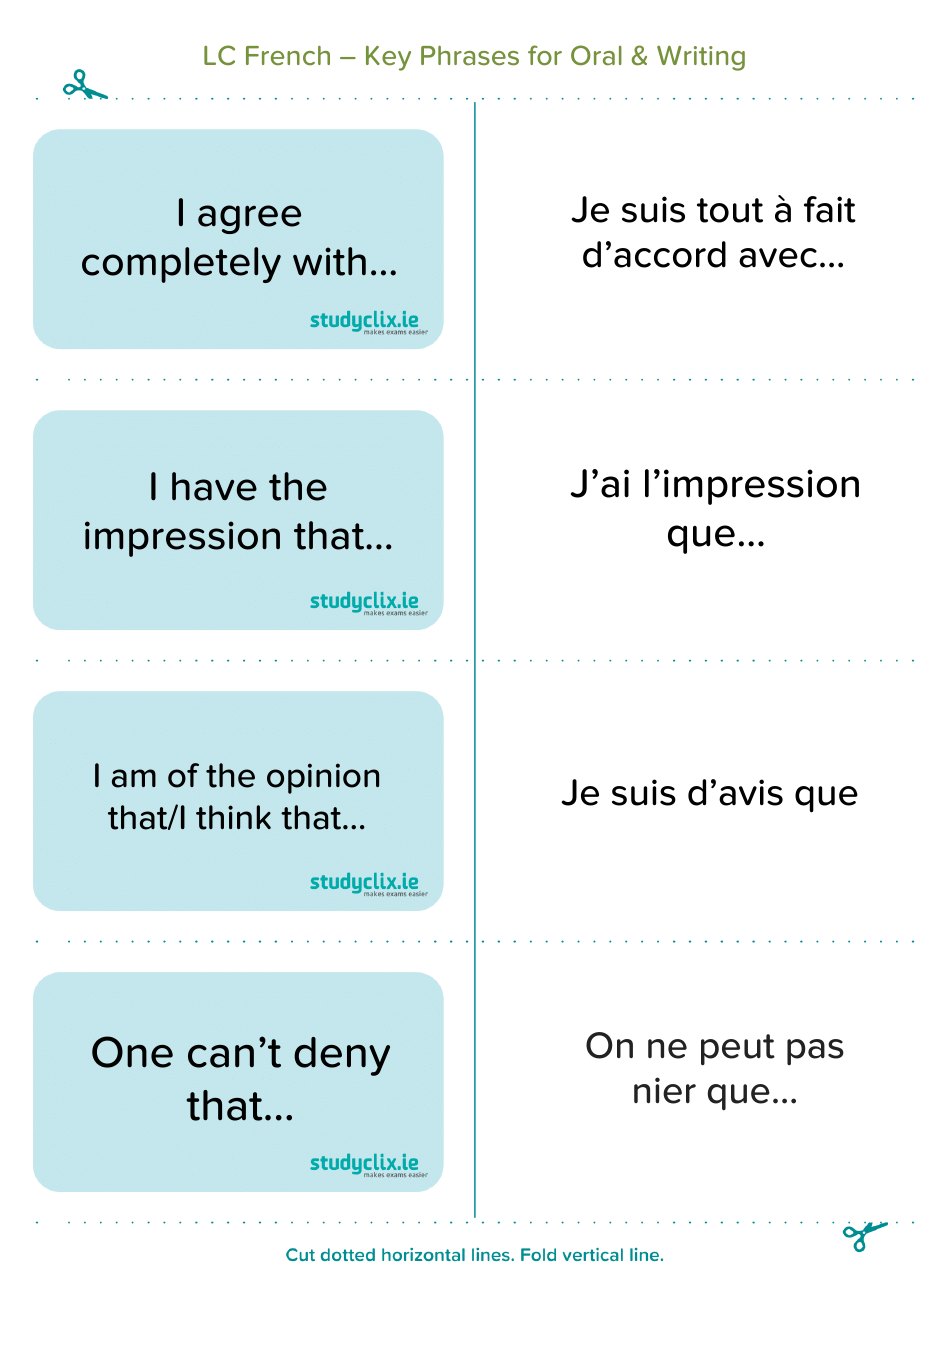 French Flashcards - Key Phrases for Oral and Writing, Page 1